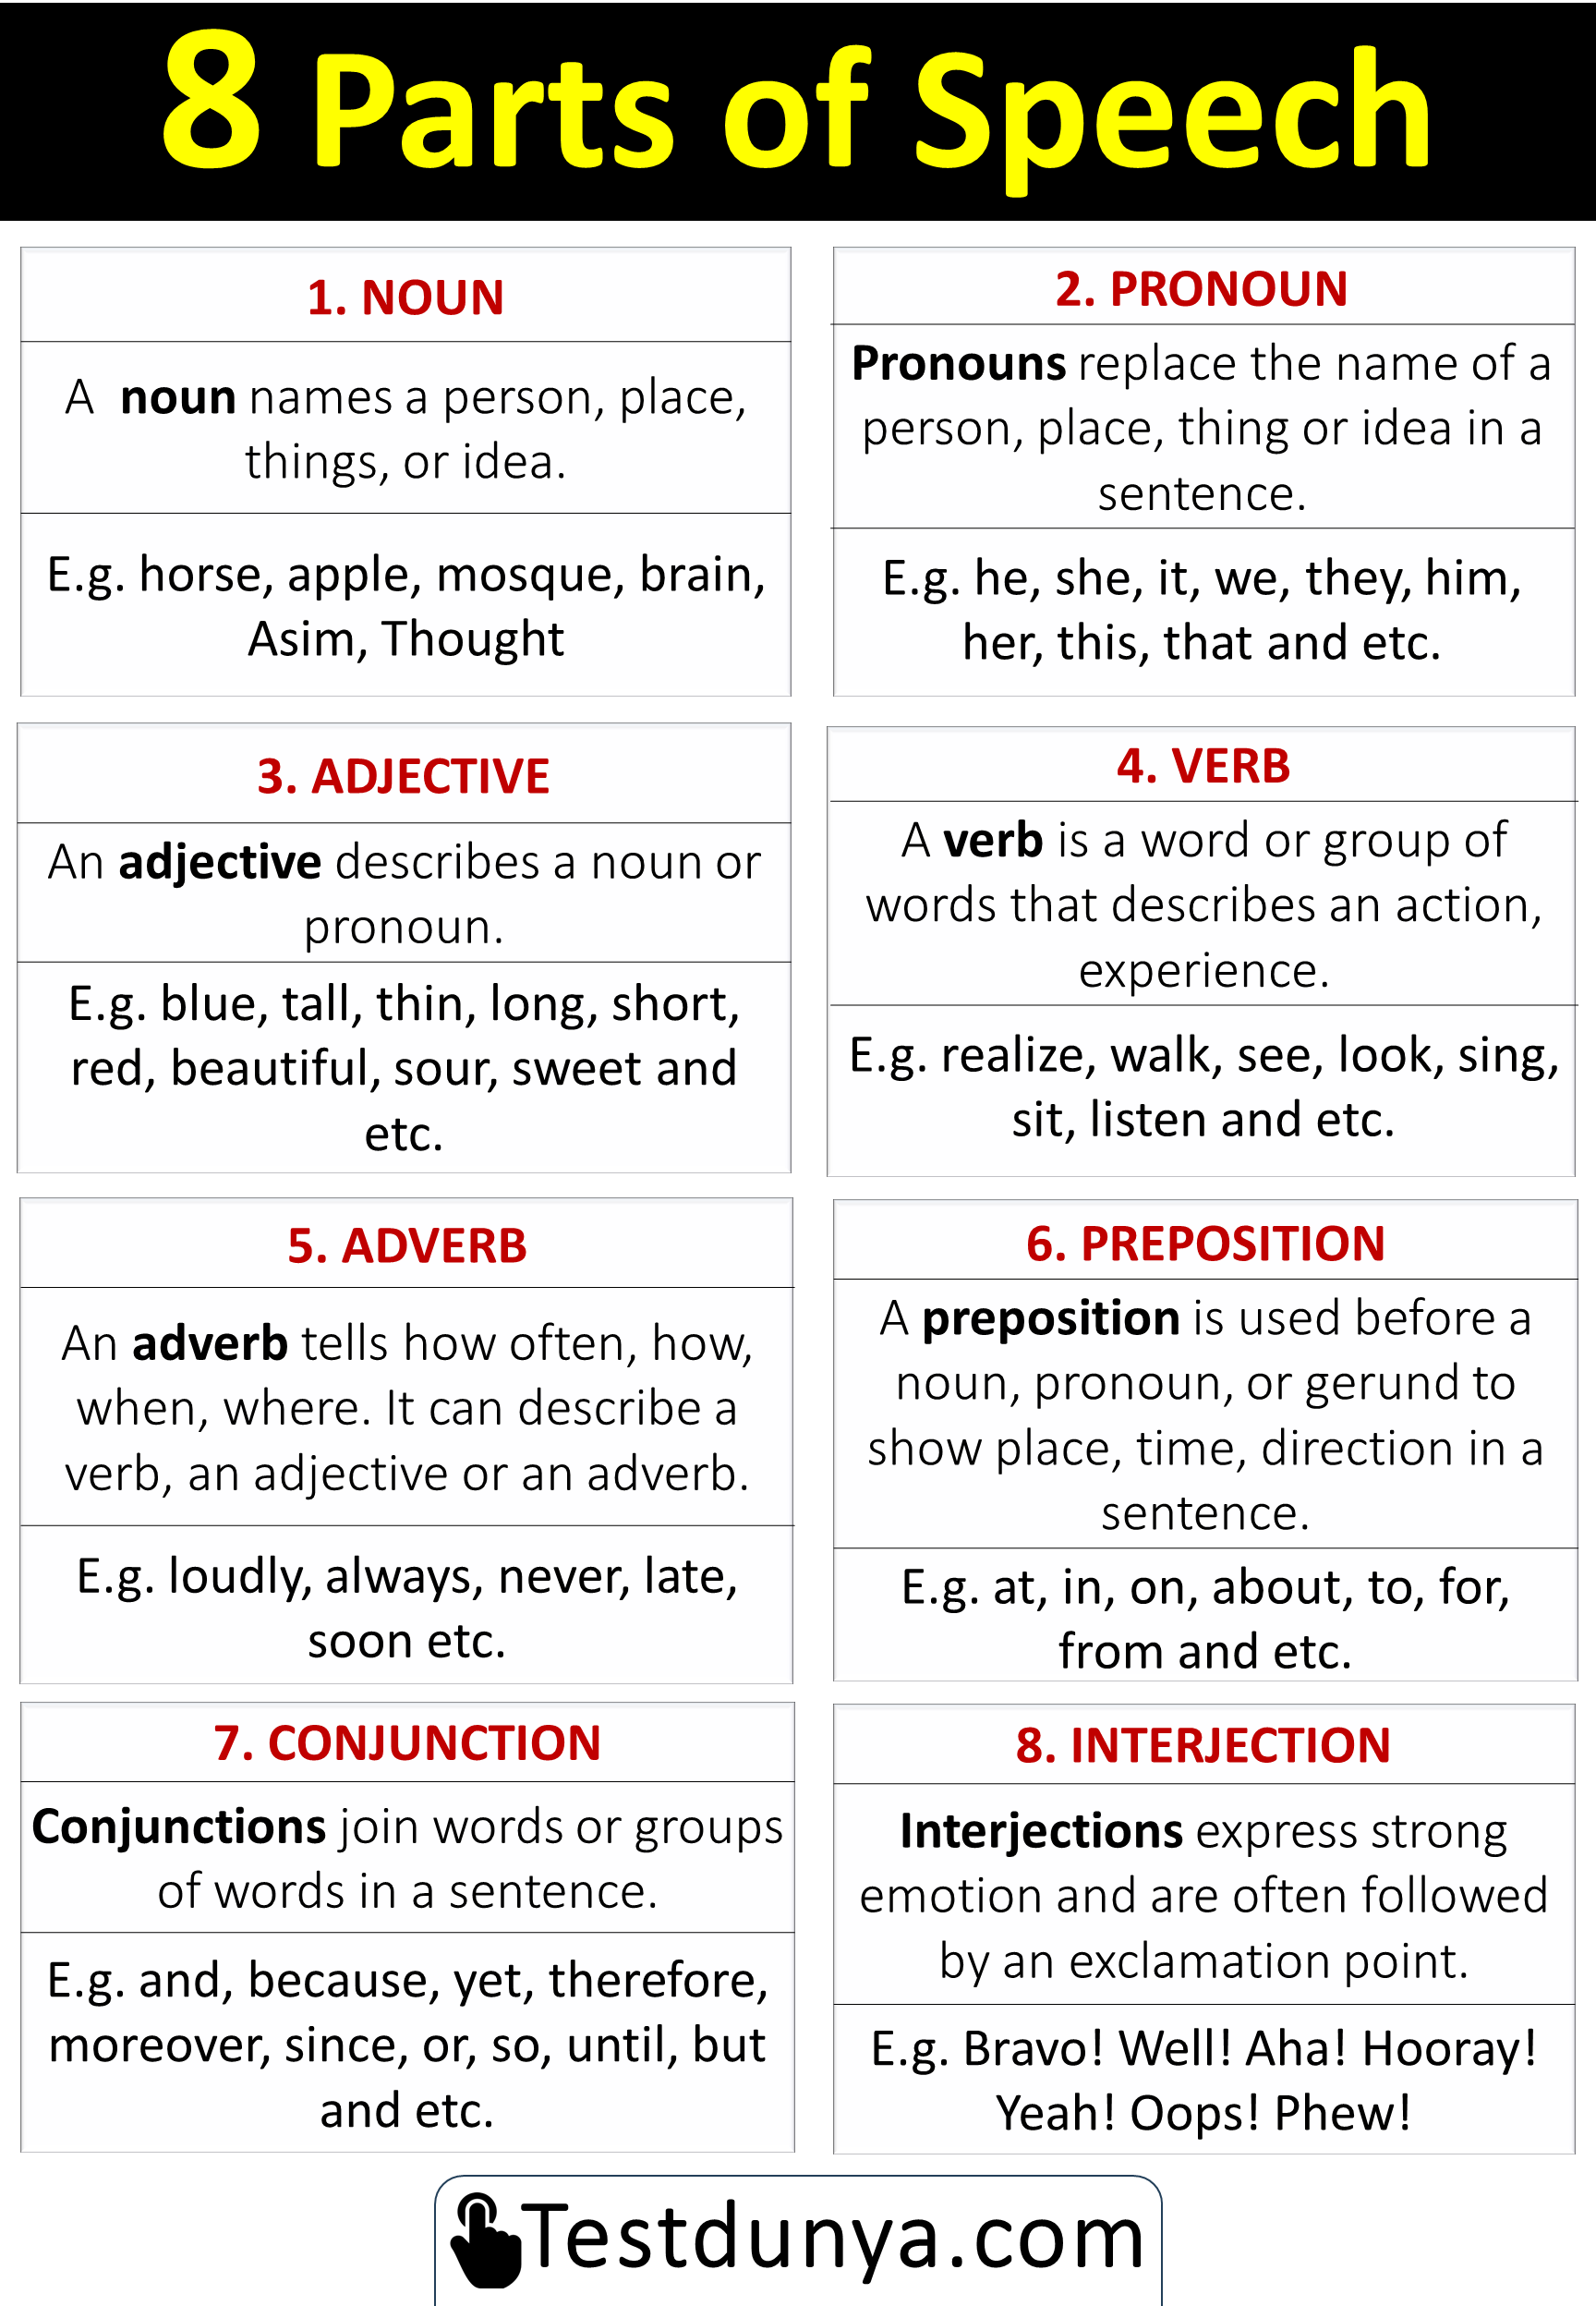 8 parts of speech with examples